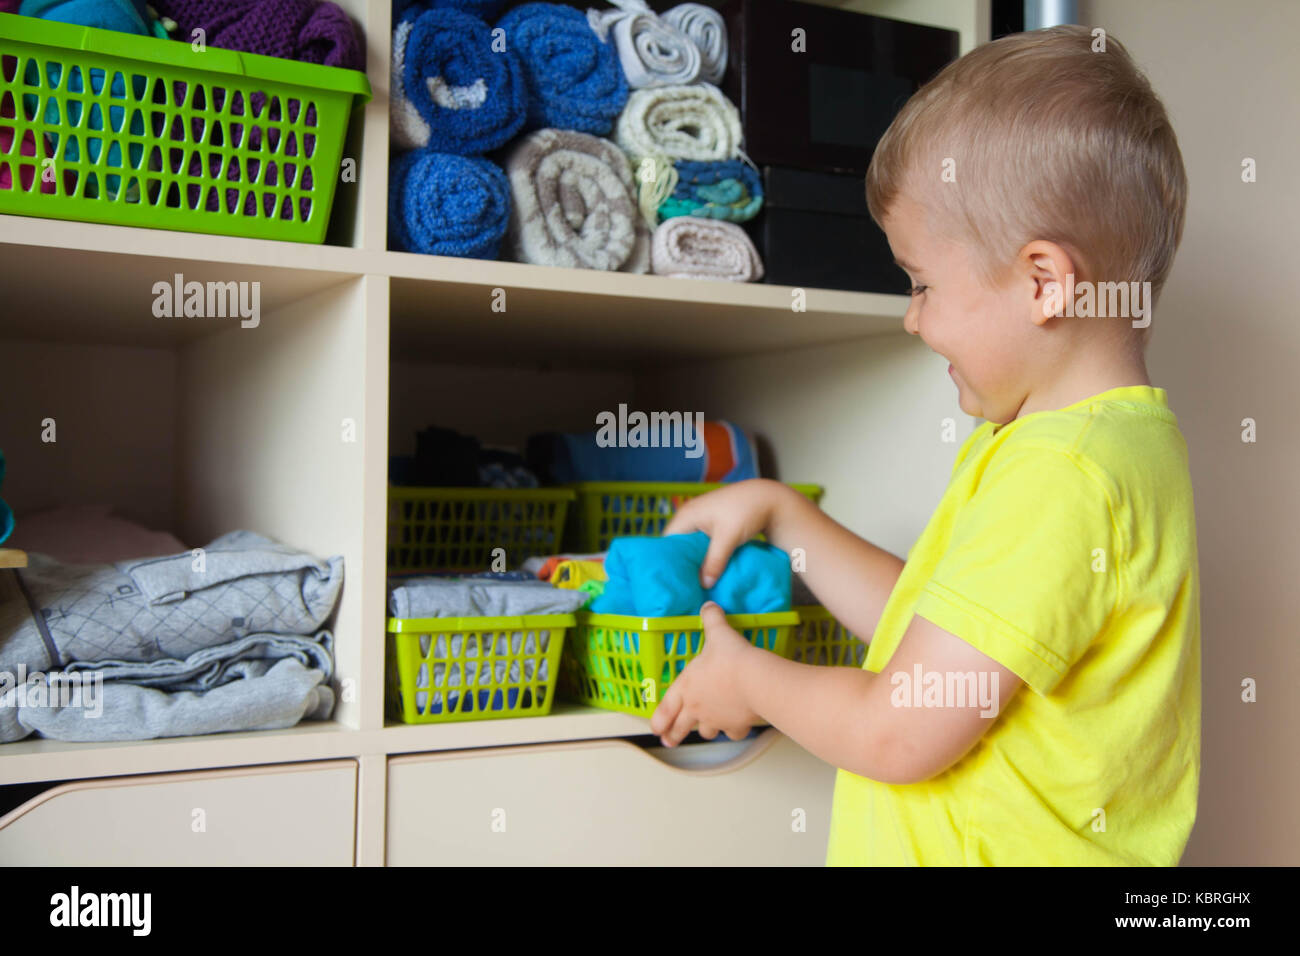 The child puts his clothes on. The boy pulls the T-shirt out of the closet. Stock Photo